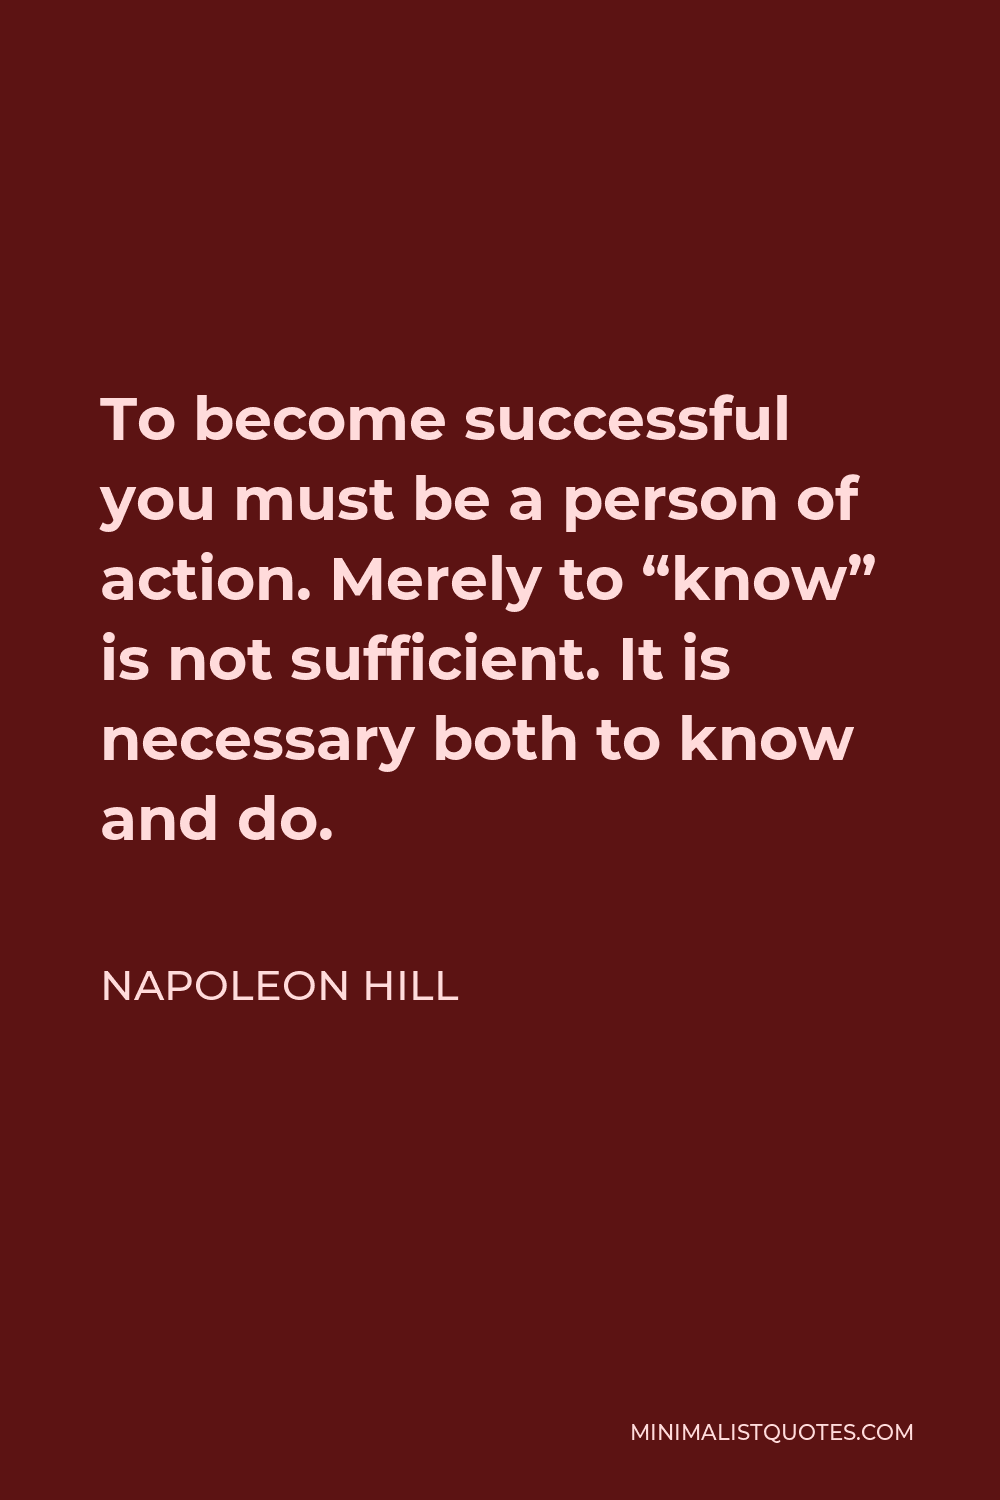 Napoleon Hill Quote - To become successful you must be a person of action. Merely to “know” is not sufficient. It is necessary both to know and do.